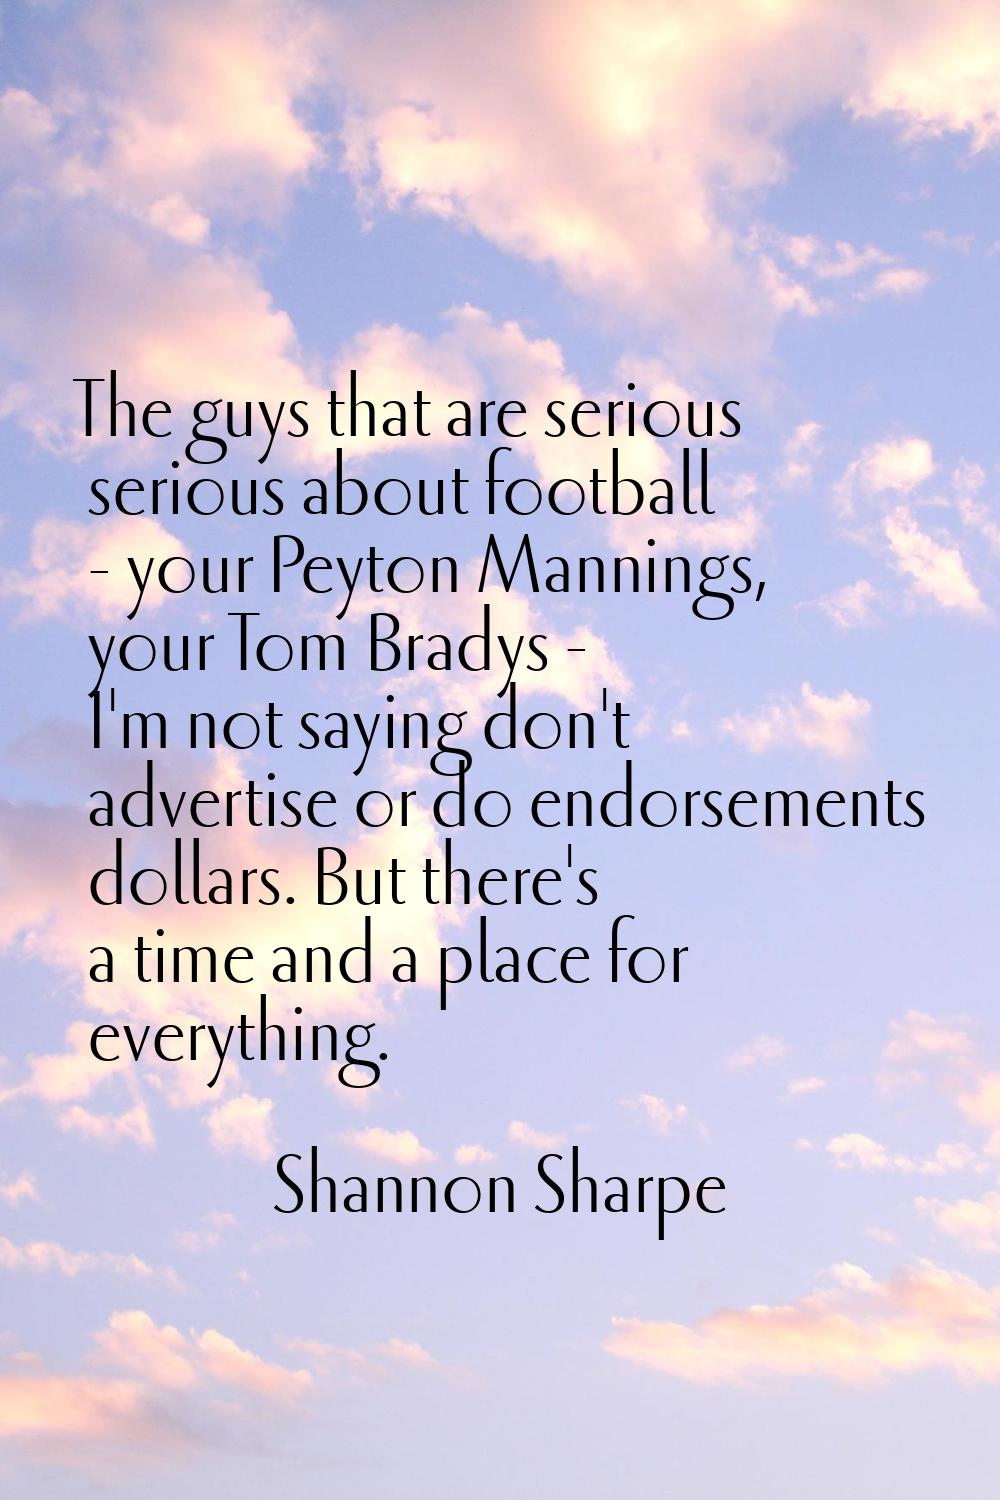 The guys that are serious serious about football - your Peyton Mannings, your Tom Bradys - I'm not 